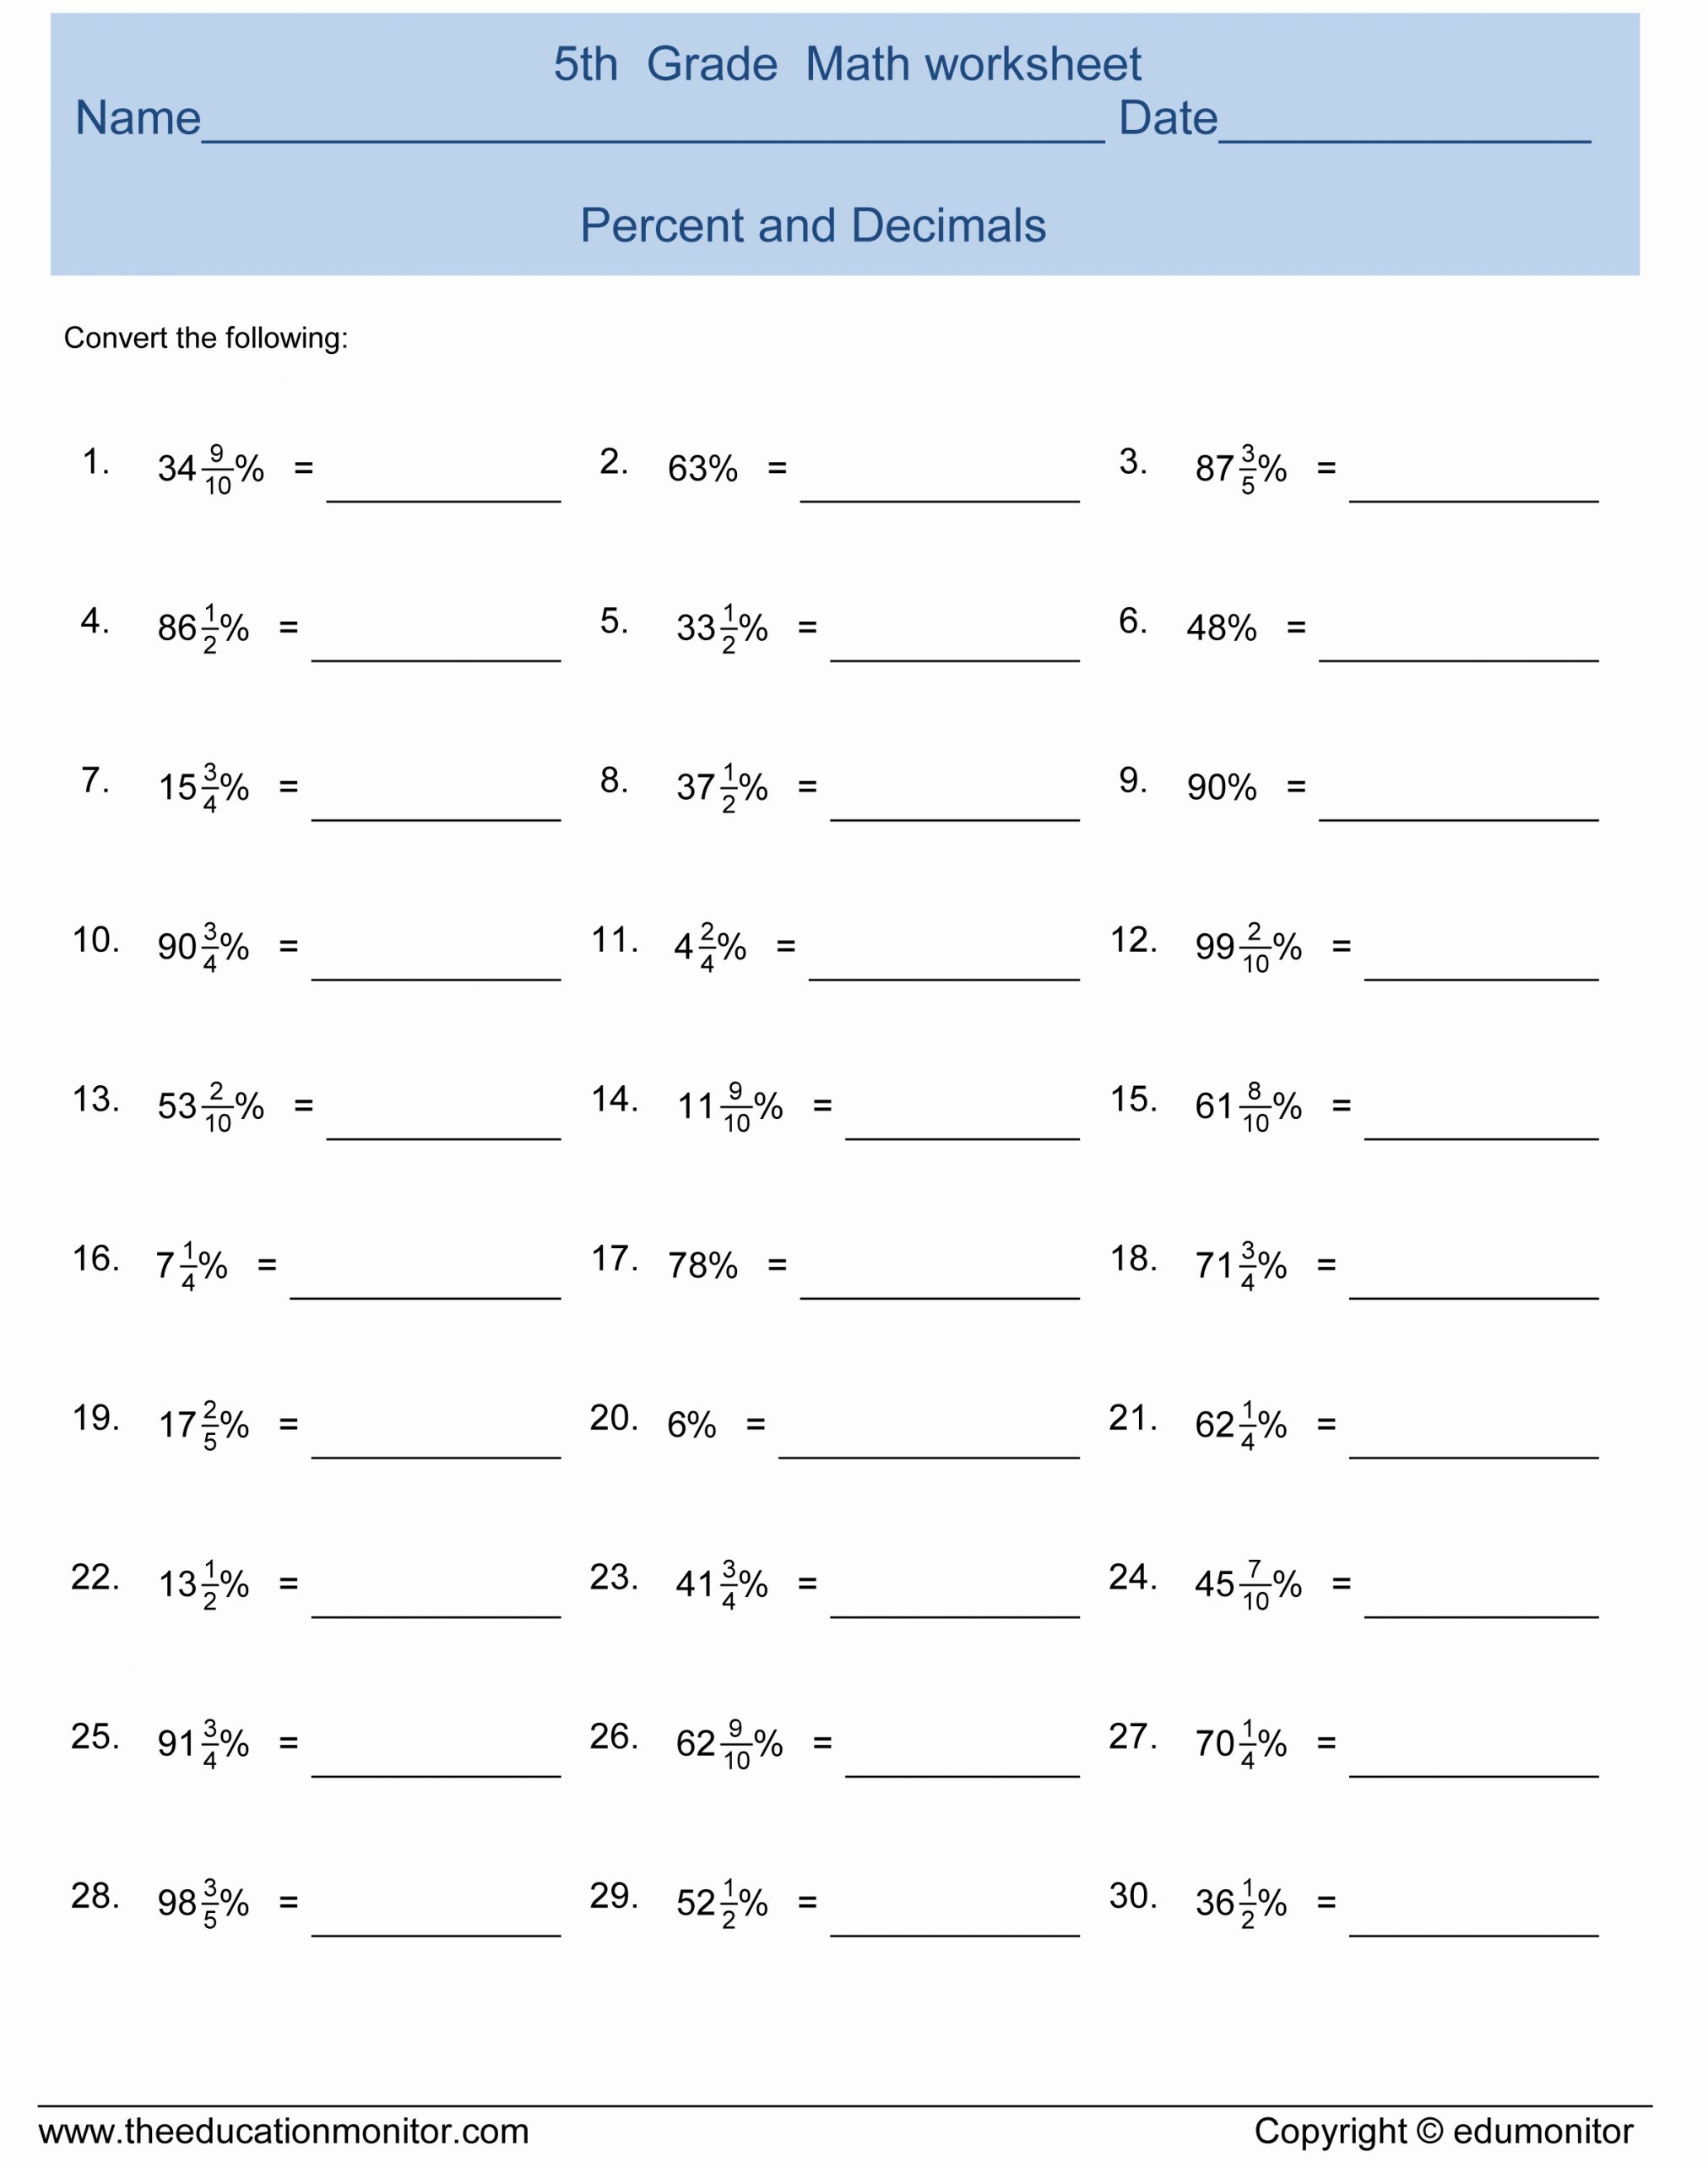 Math Conversion Worksheets 5th Grade Best Of Decimal Worksheets for 5th Grade Decimal Worksheets4th